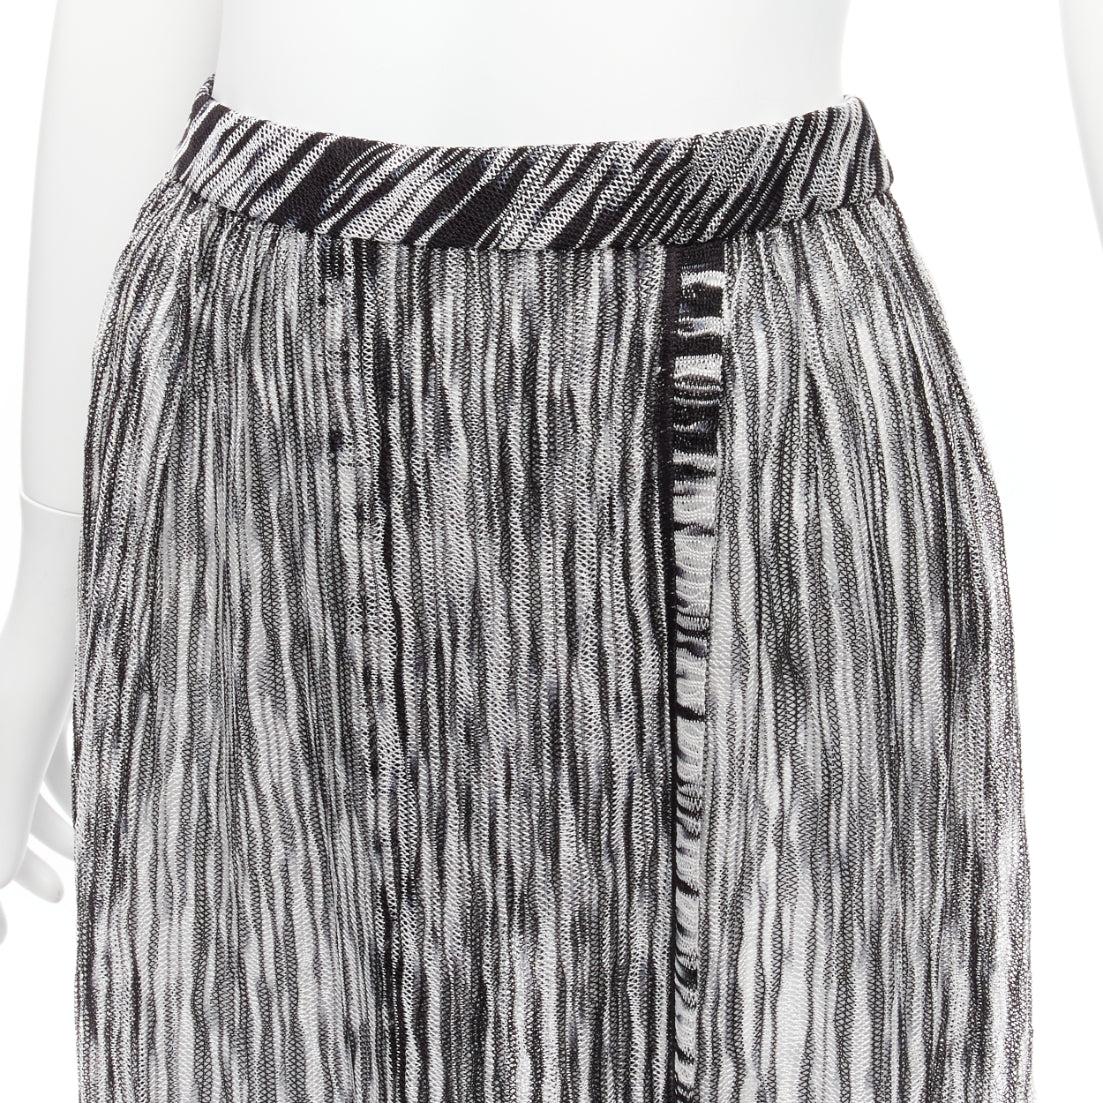 new MISSONI Mare black white melange knit elastic wrap sarong skirt IT38 XS
Reference: SNKO/A00319
Brand: Missoni
Material: Rayon
Color: Black, White
Closure: Elasticated
Extra Details: Elasticated waistband.
Made in: Italy

CONDITION:
Condition: